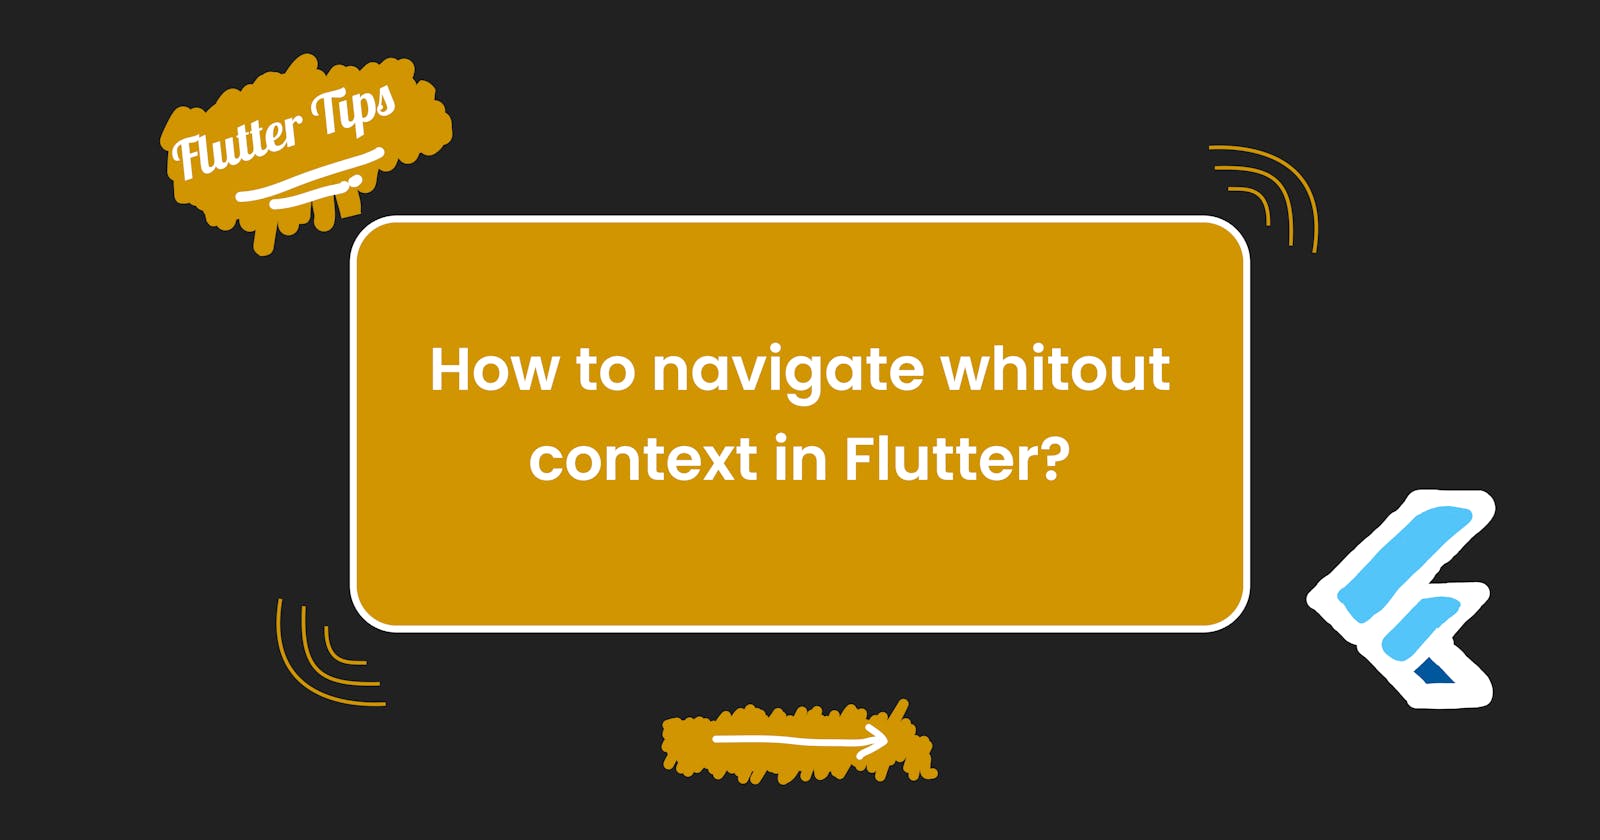 How to navigate without context in Flutter?